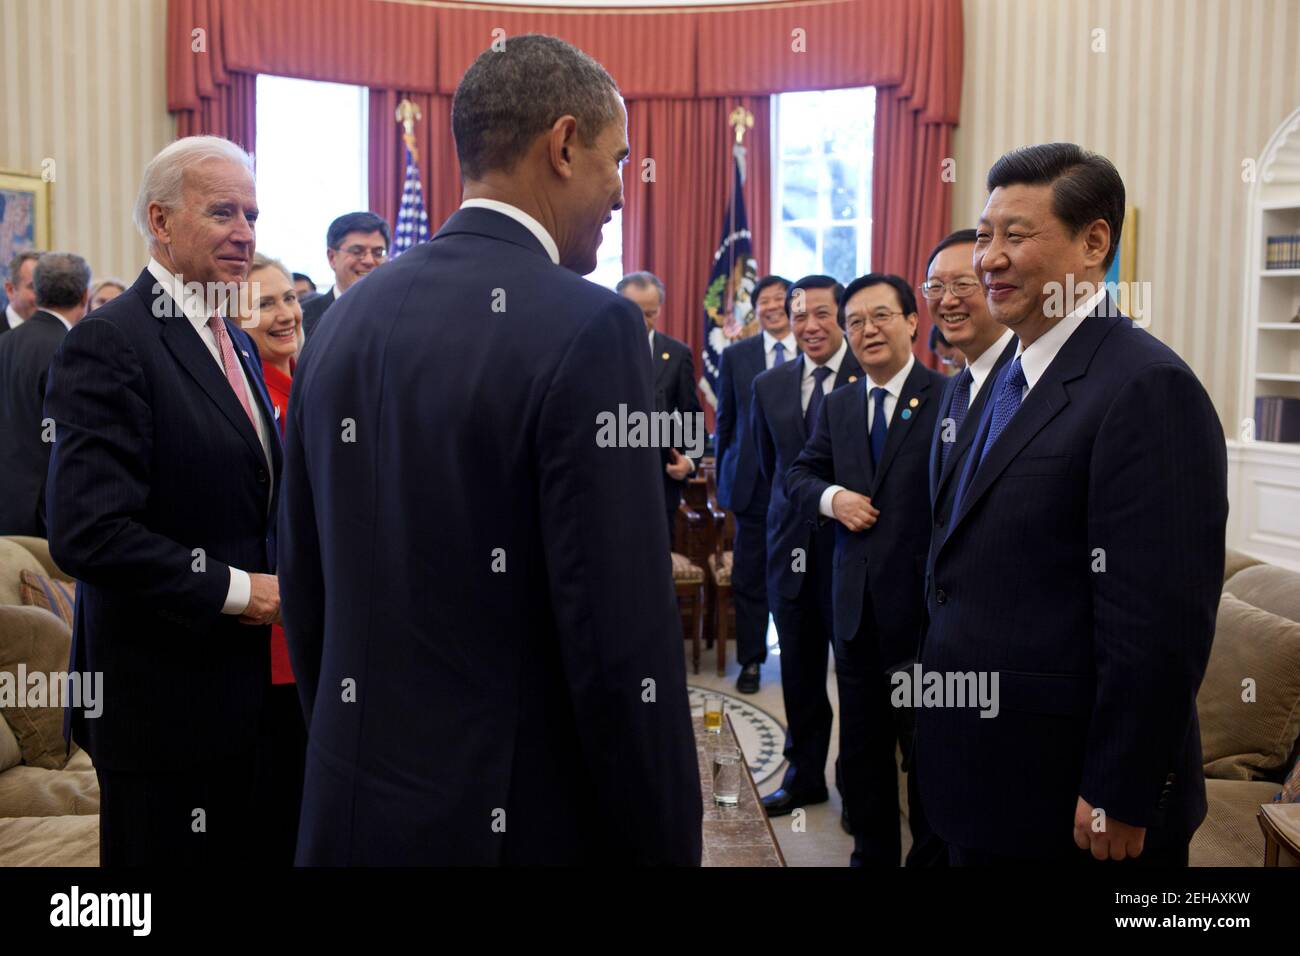 President Barack Obama and Vice President Joe Biden talk with Vice President Xi Jinping of the People’s Republic of China and members of the Chinese delegation following their bilateral meeting in the Oval Office, Feb. 14, 2012. Stock Photo